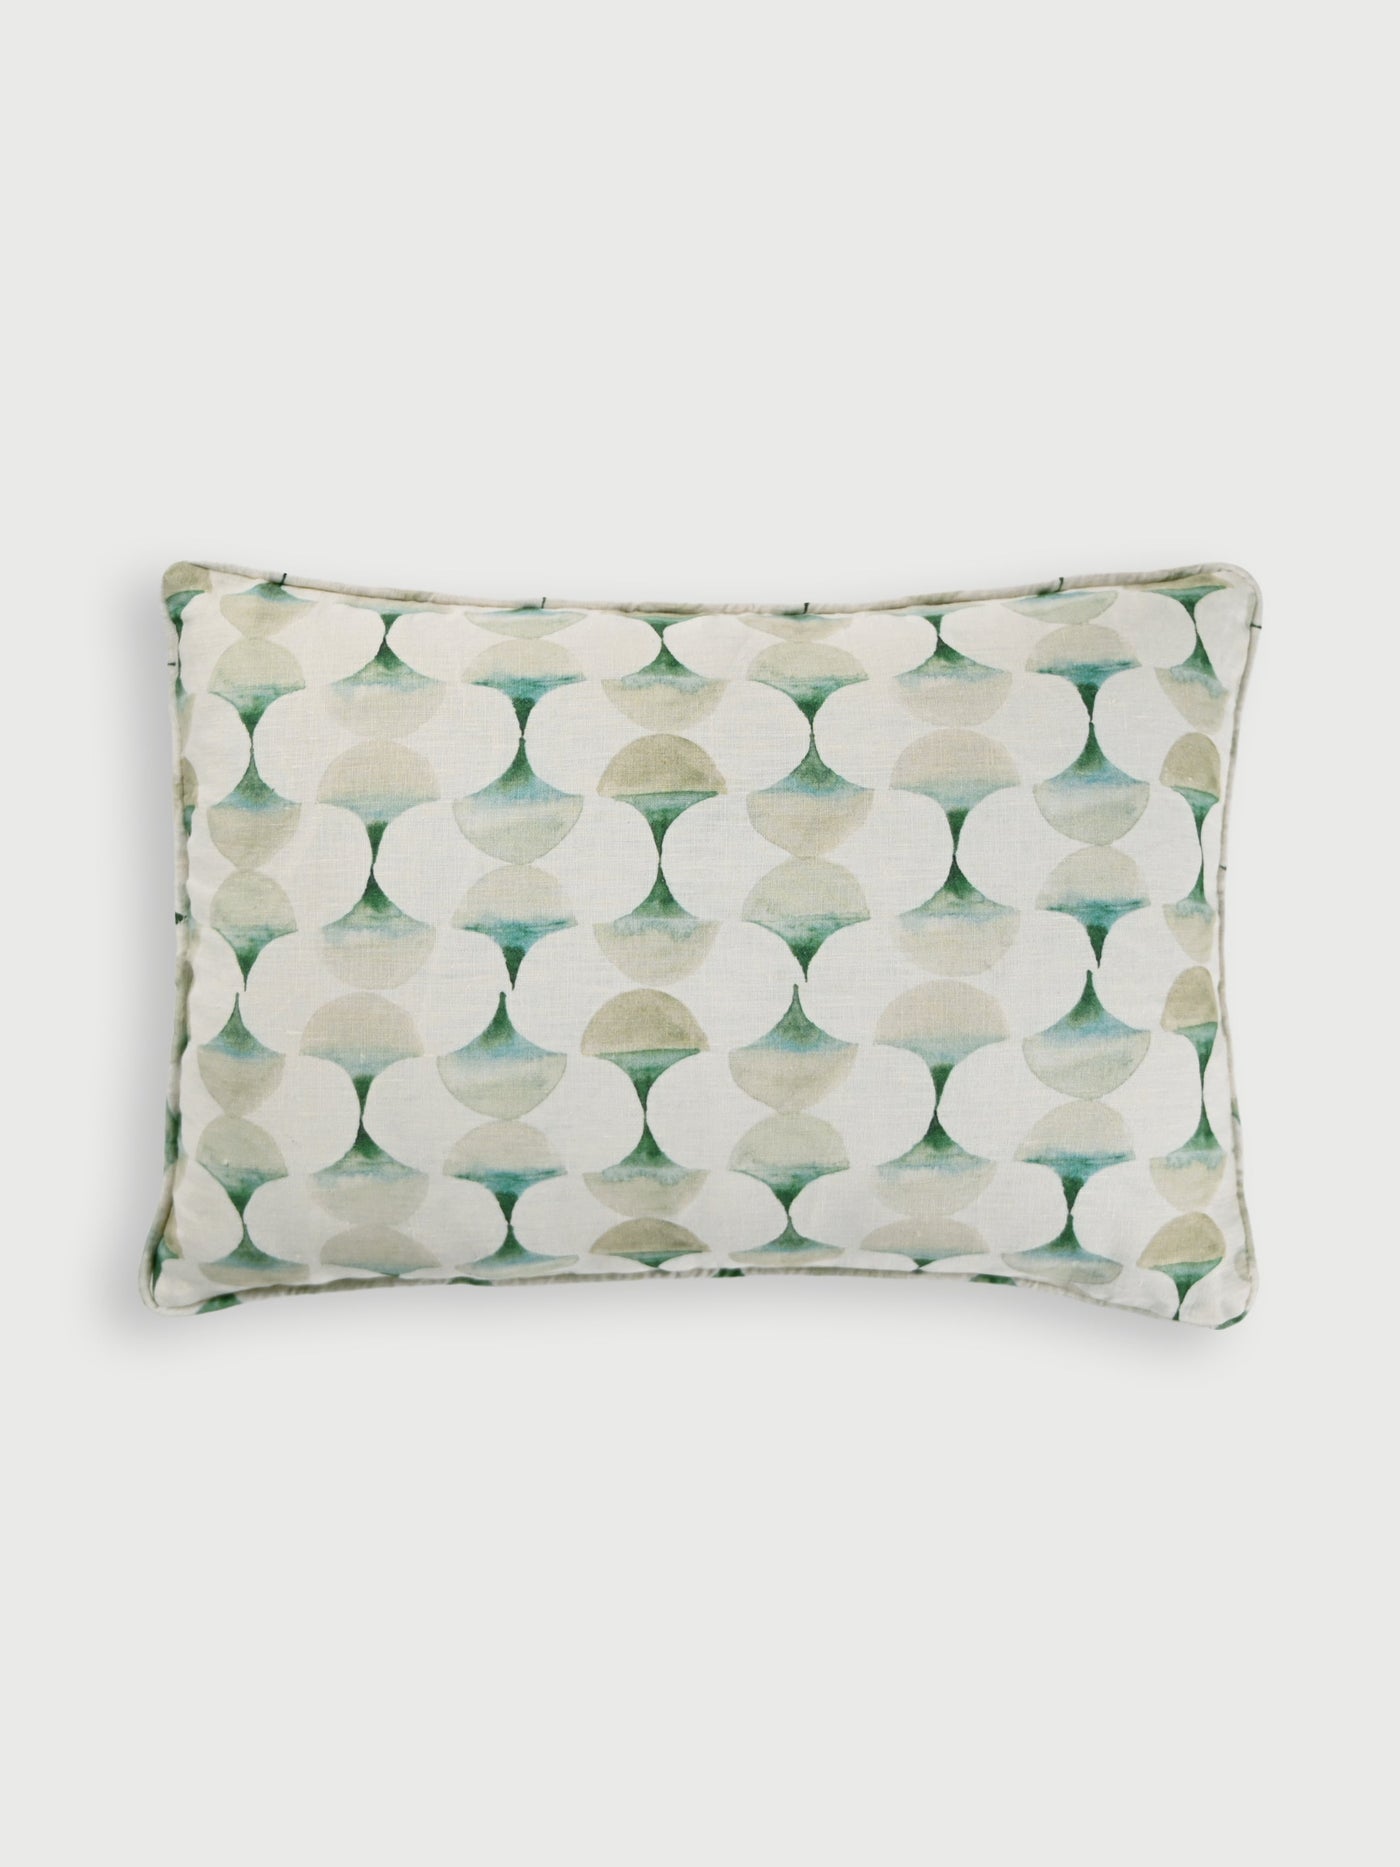 Cushion Cover - Cove Teal Oblong Linen